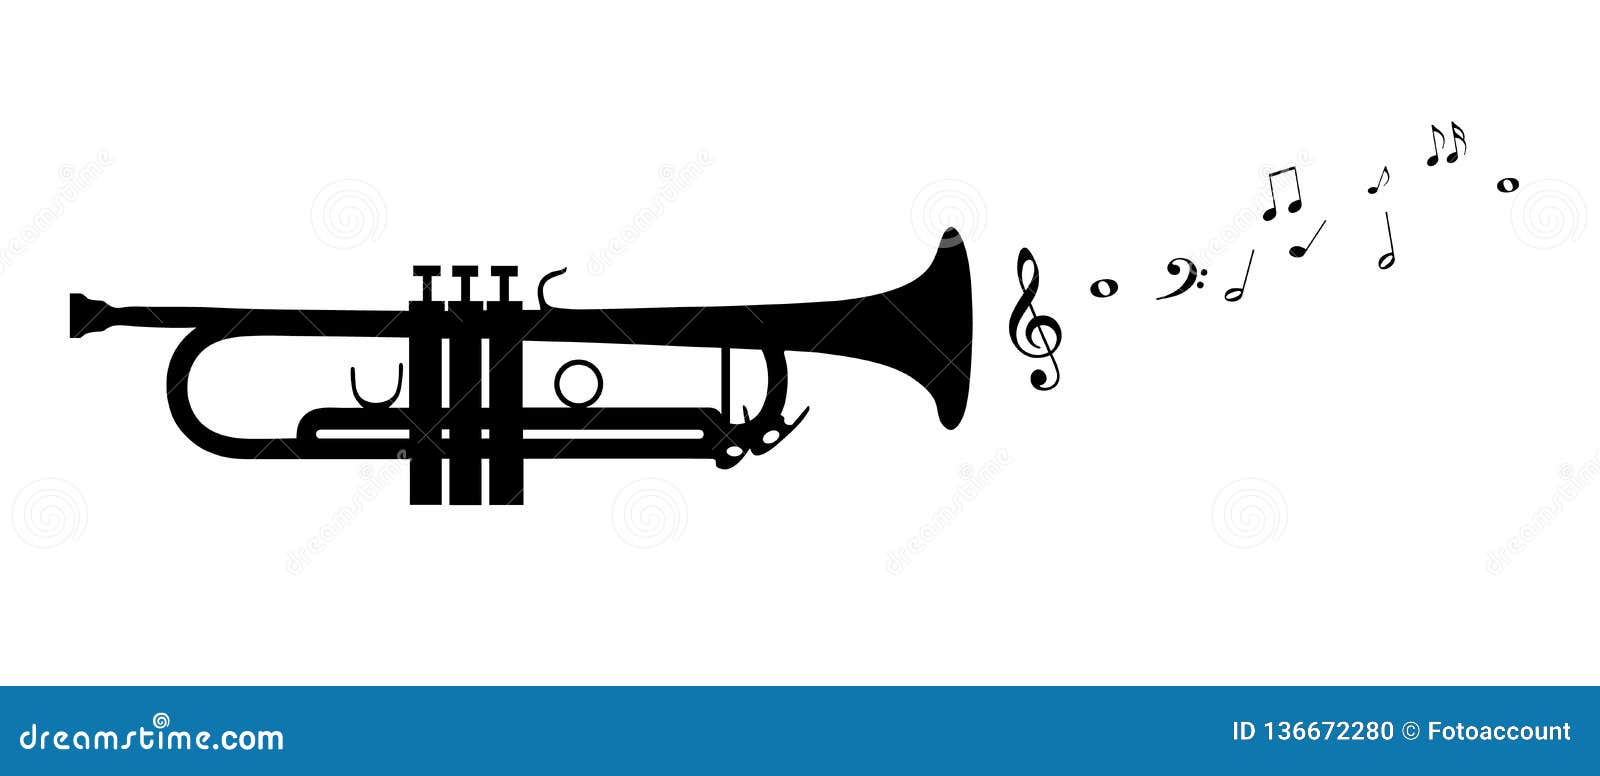 https://thumbs.dreamstime.com/z/trumpet-silhouette-flying-notes-black-vector-illustration-isolated-white-background-136672280.jpg